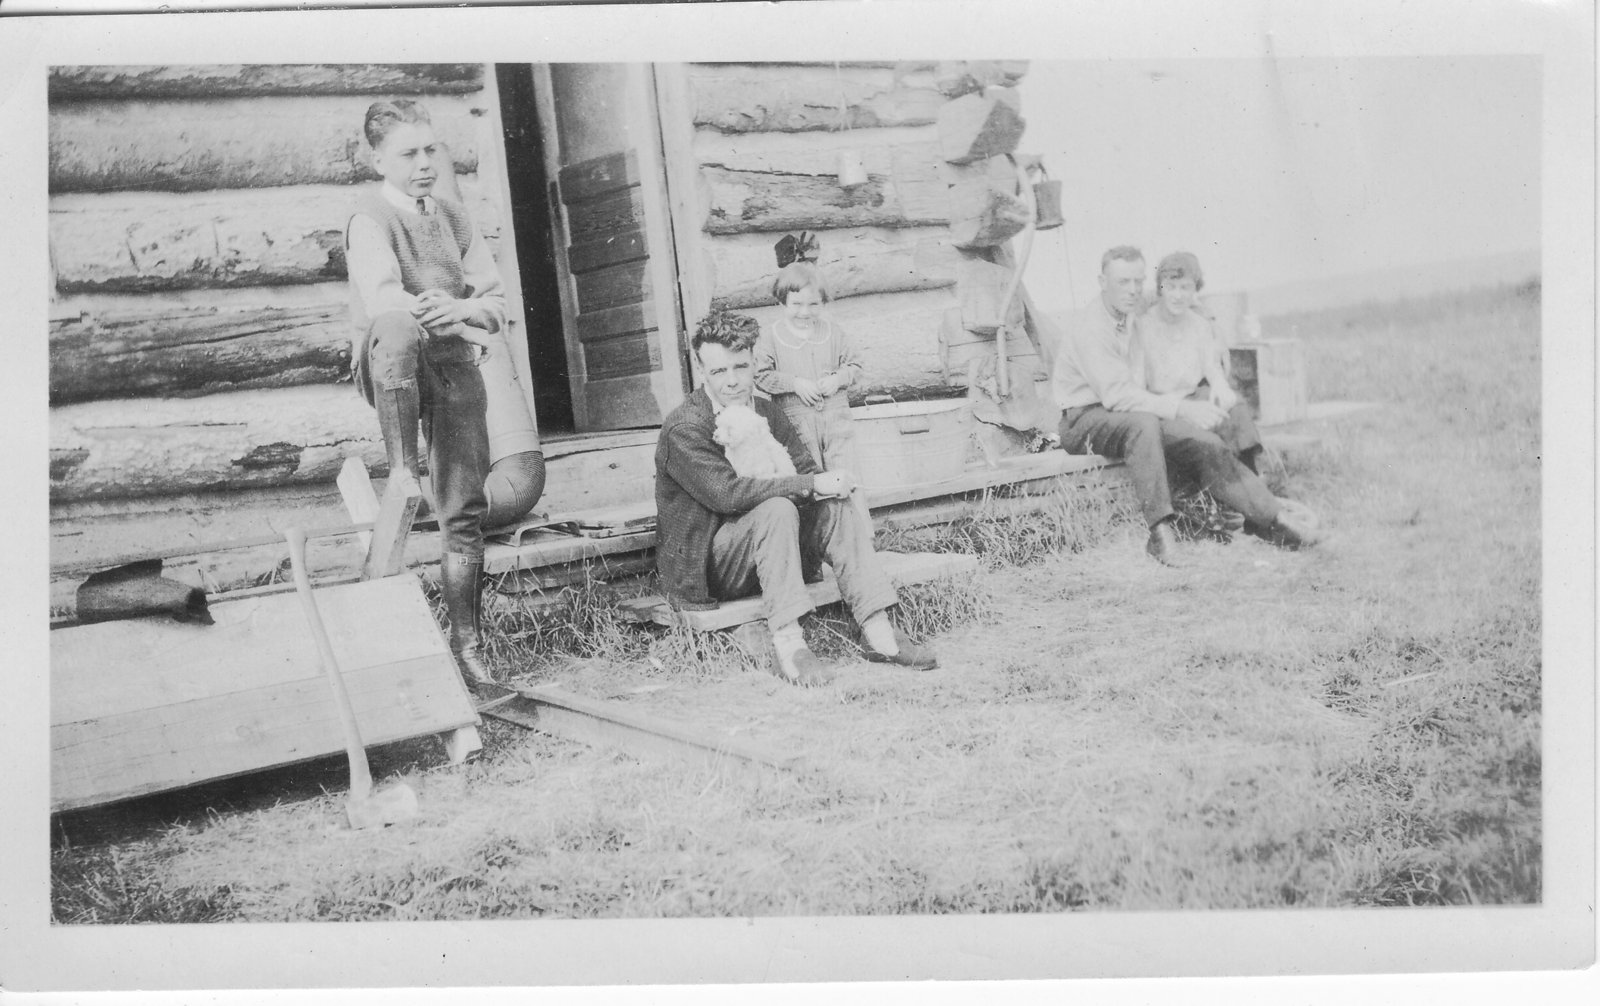 Group of people sitting by log cabin